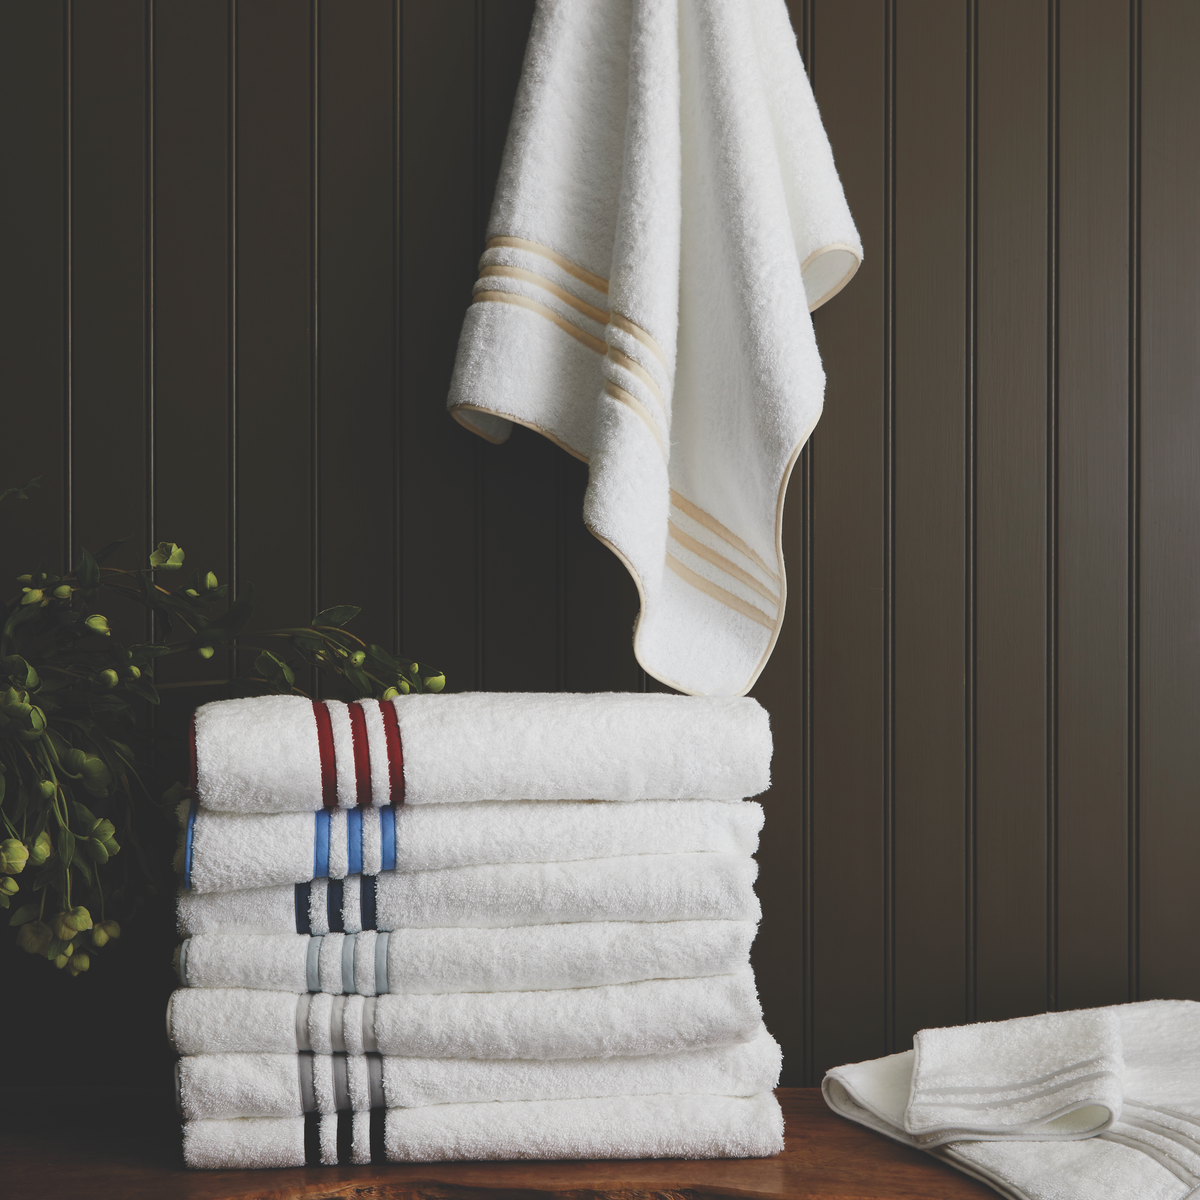 Lifestyle Image Showing All Colors of Matouk Newport Bath Towels and Mat